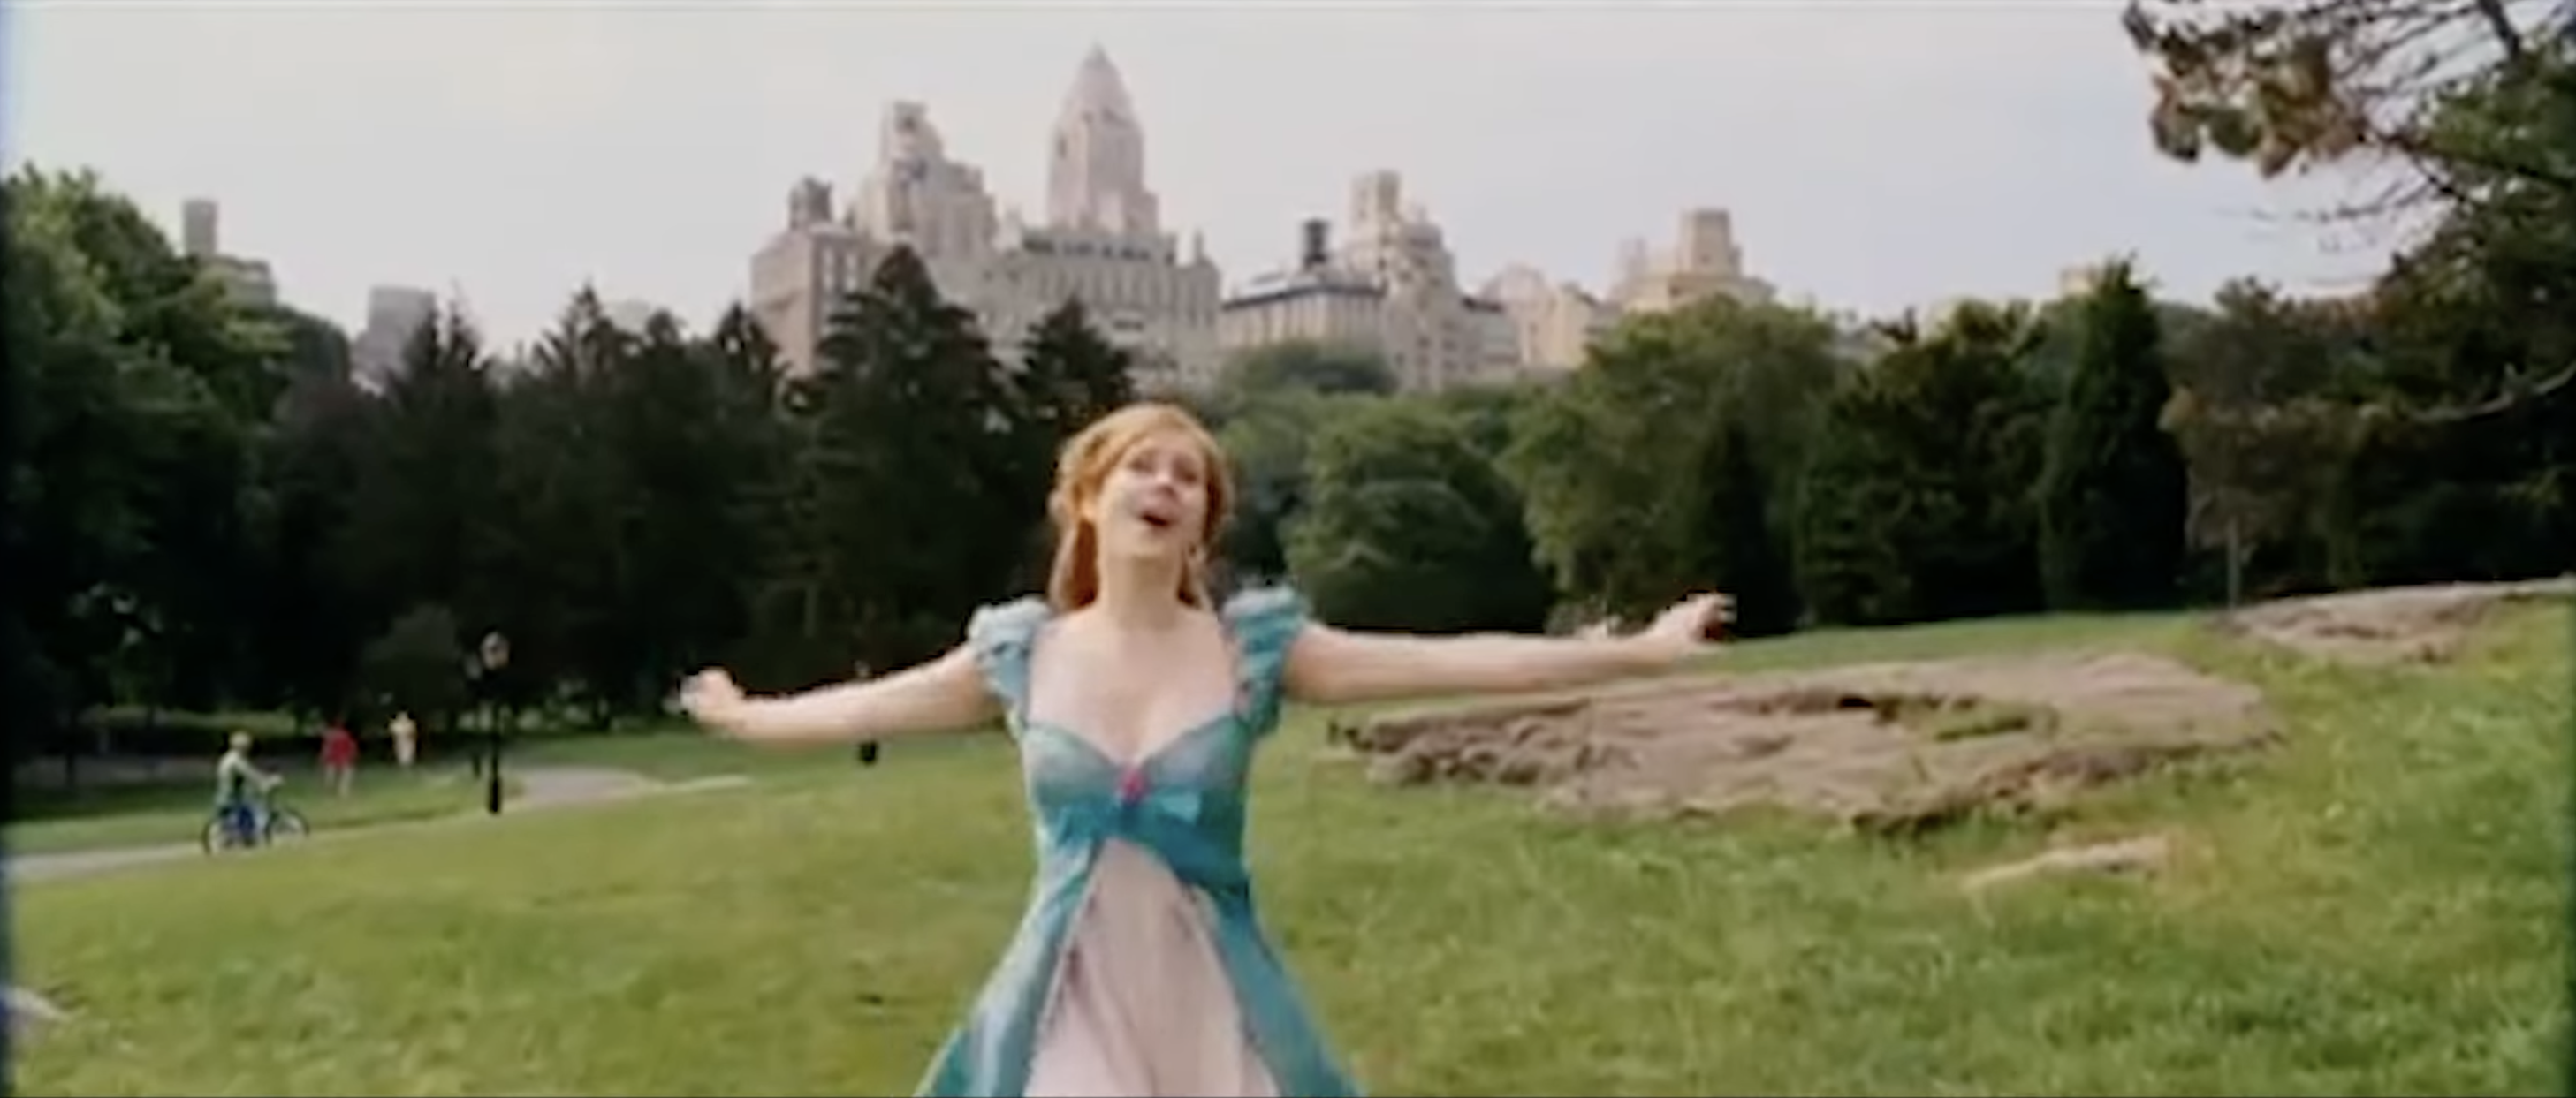 Giselle running through a park singing